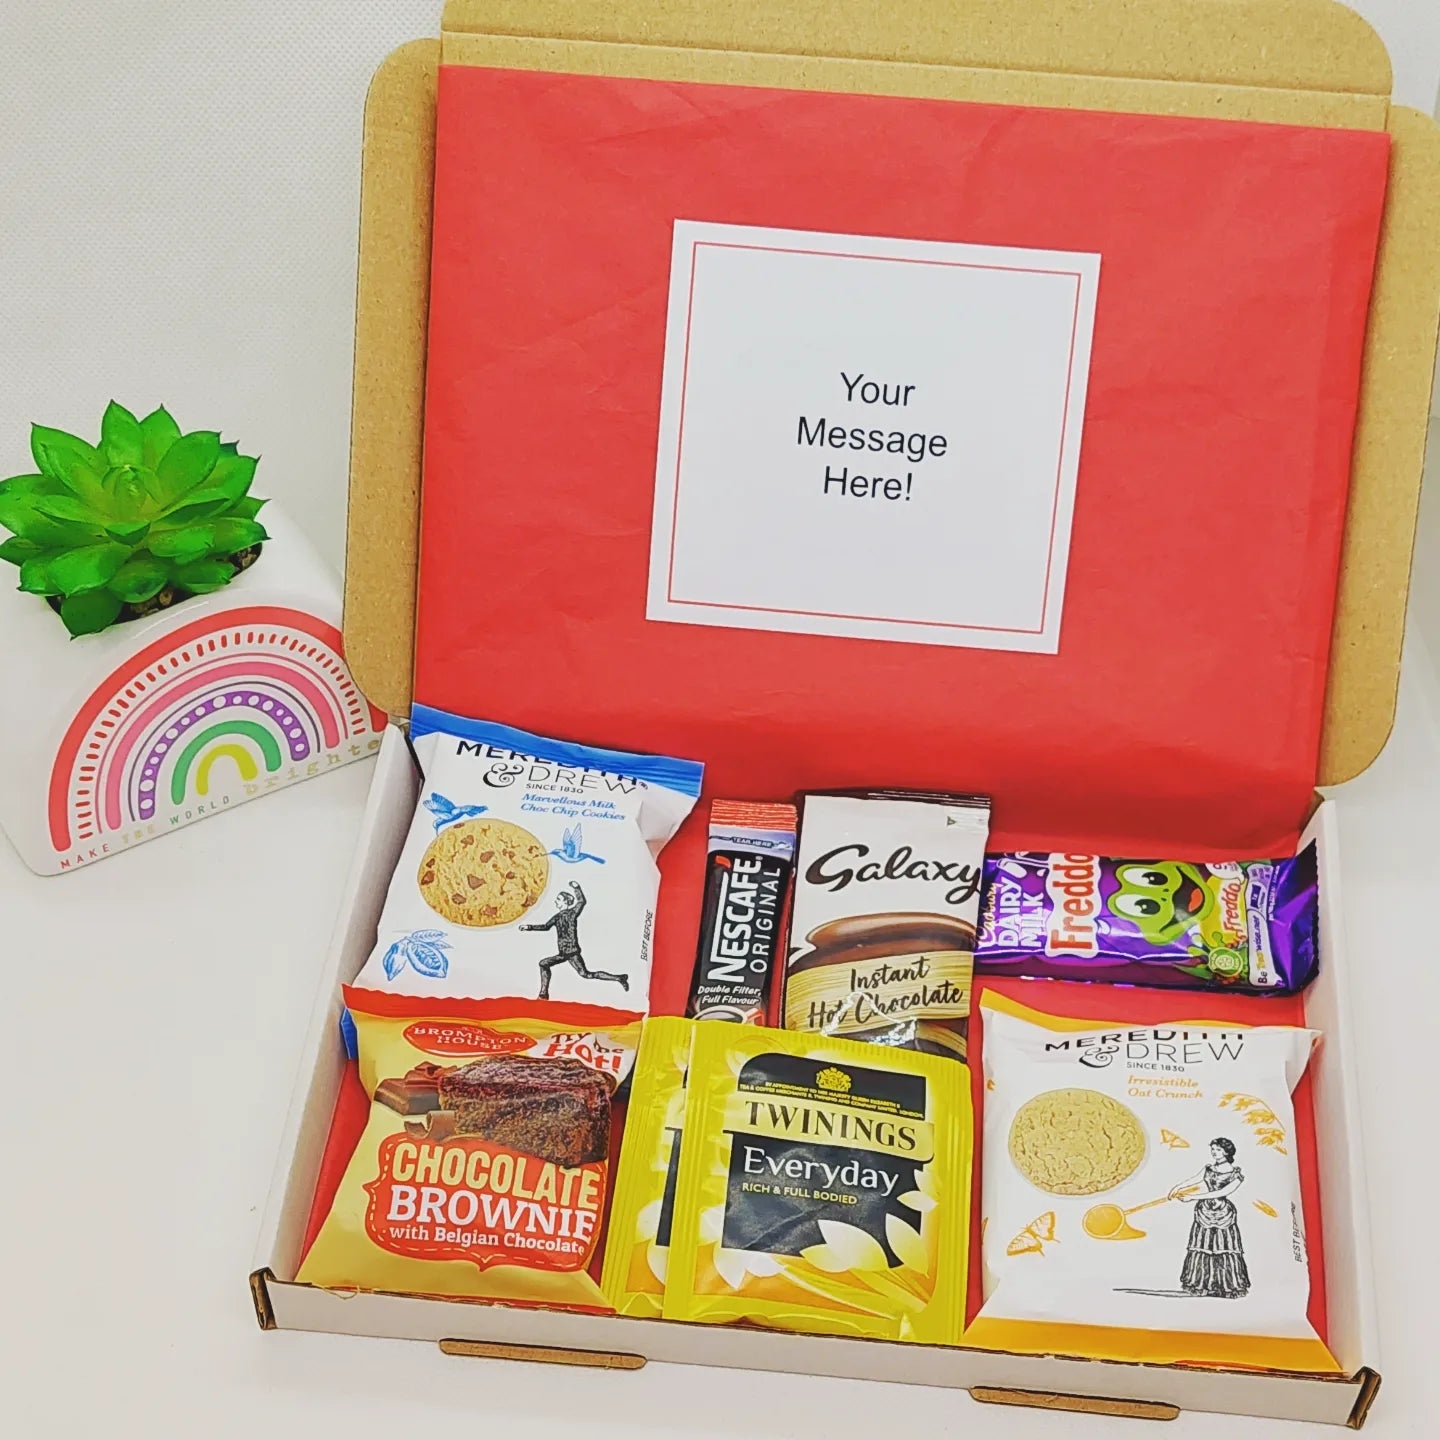 Afternoon Tea Letterbox Gift – The Happiness Box Regular